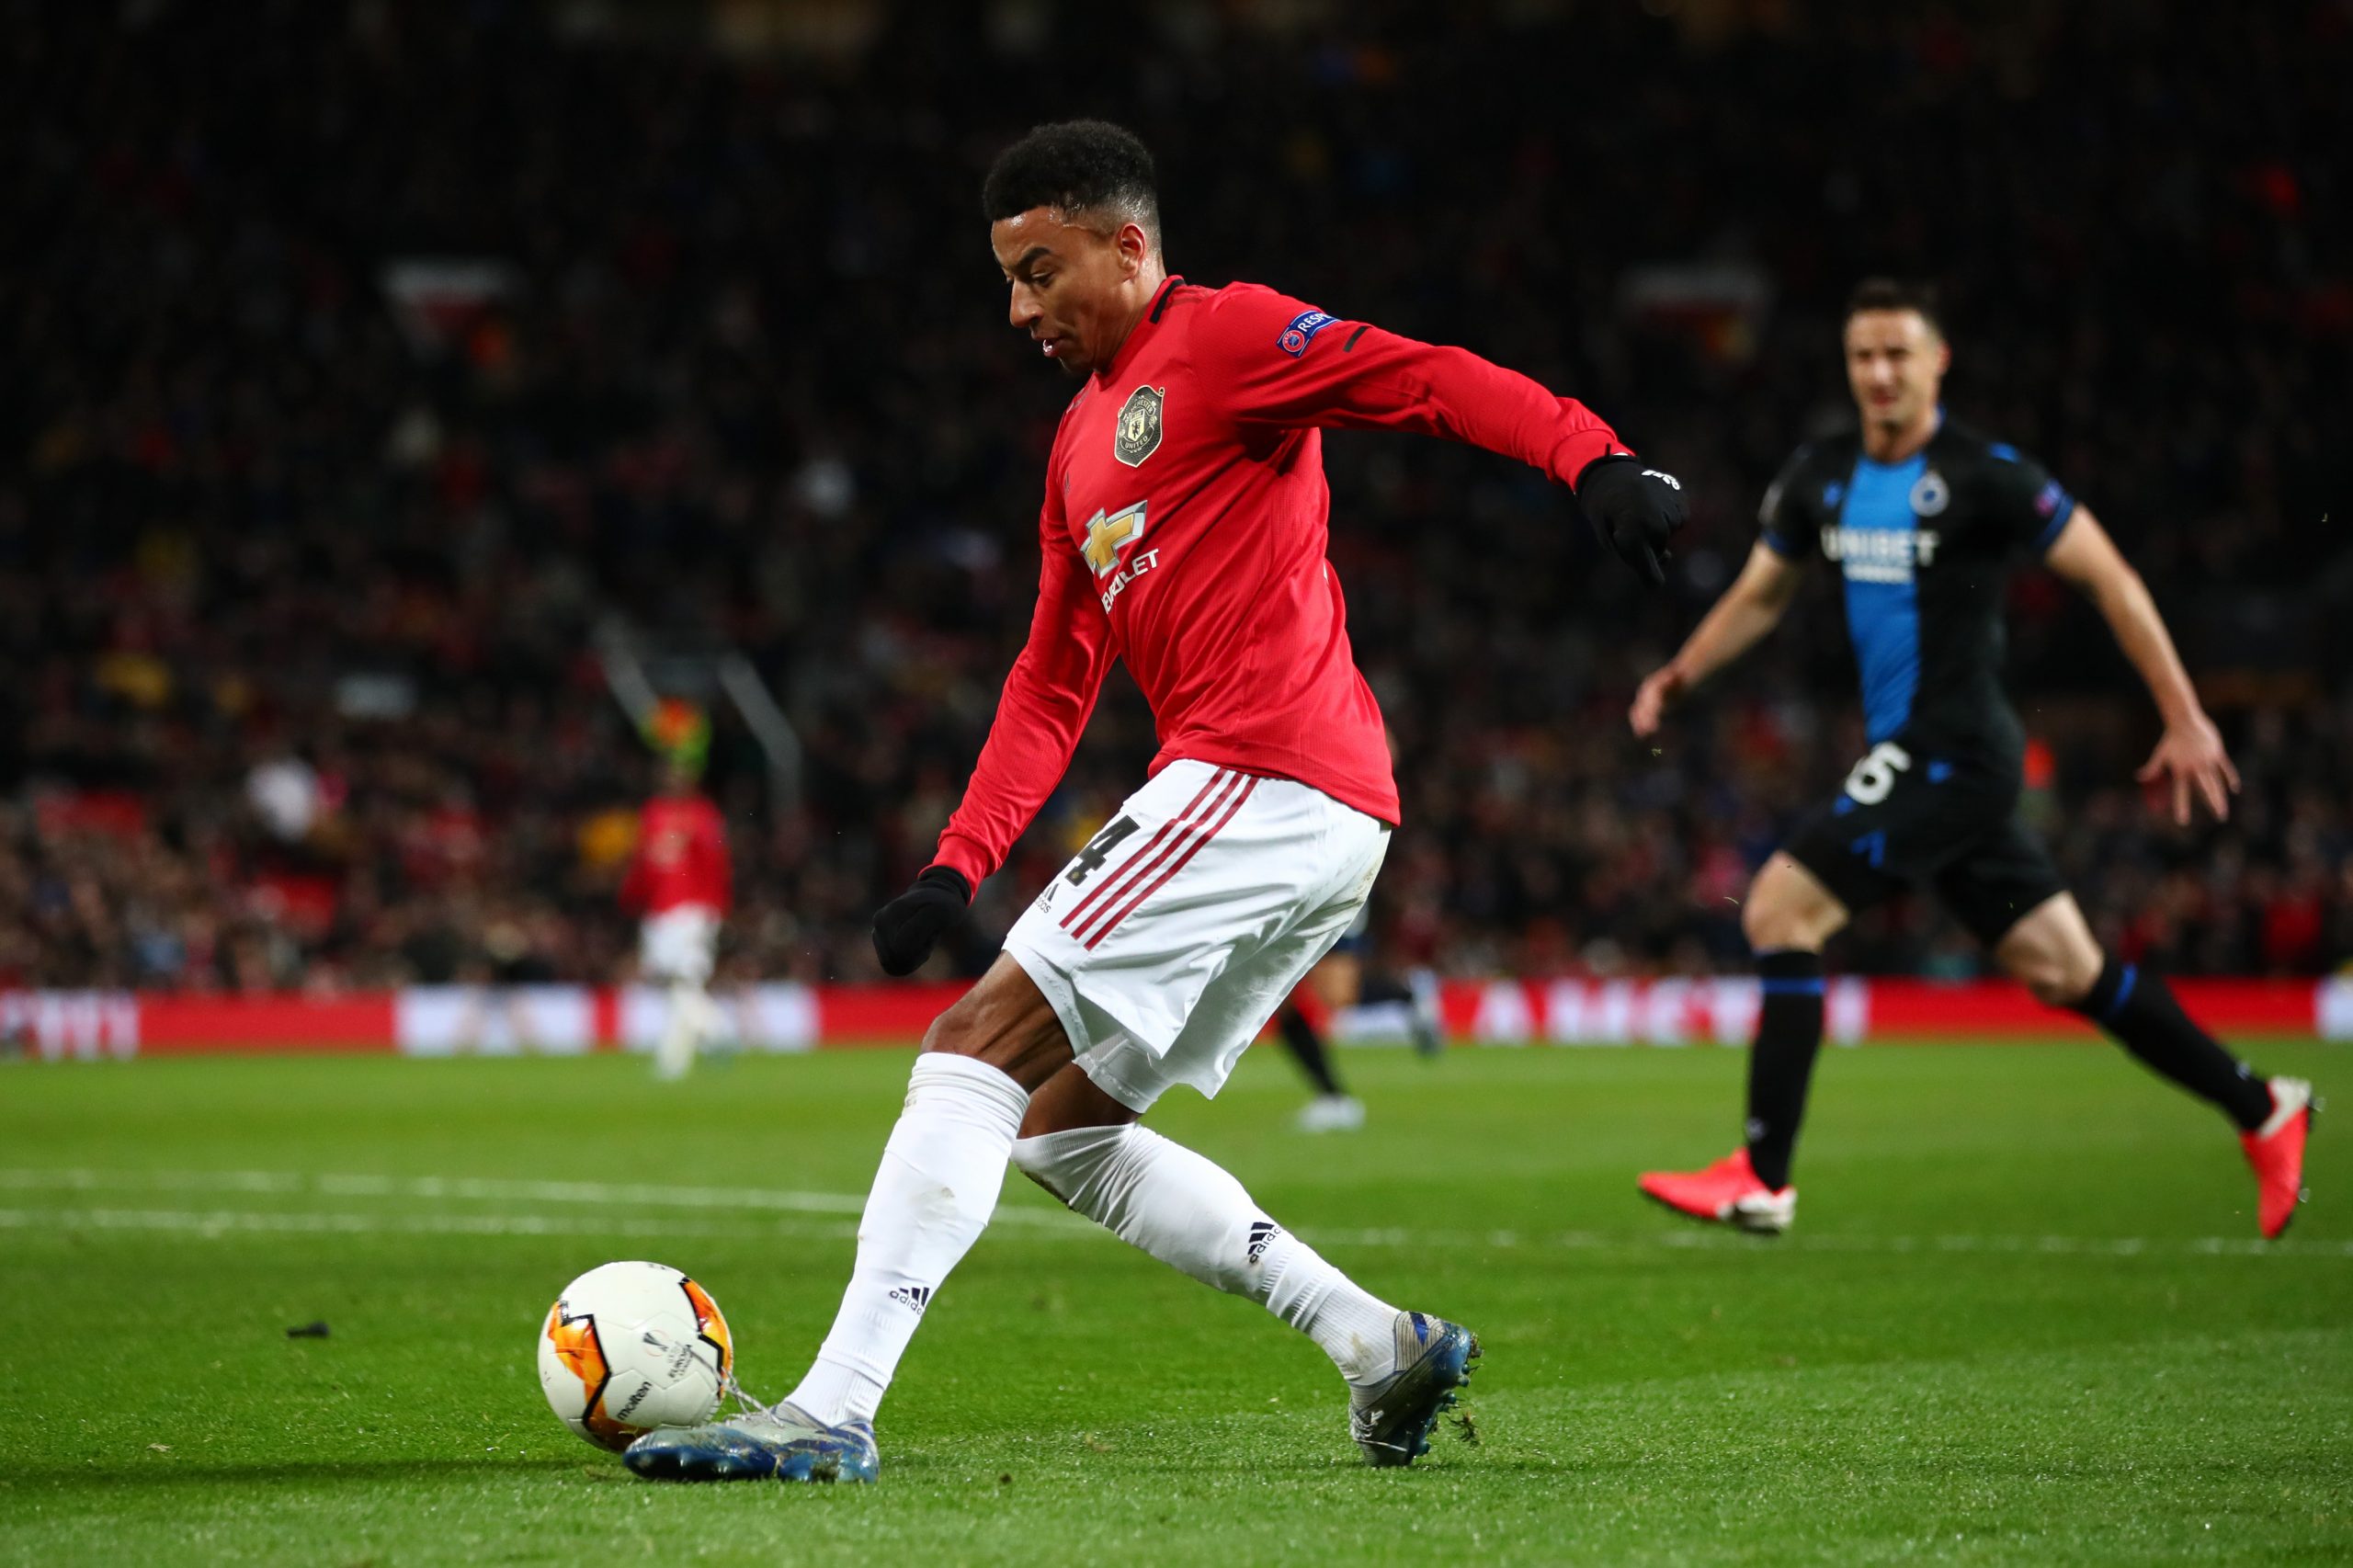 West Ham United confirm the loan capture of Jesse Lingard who is in action in the picture